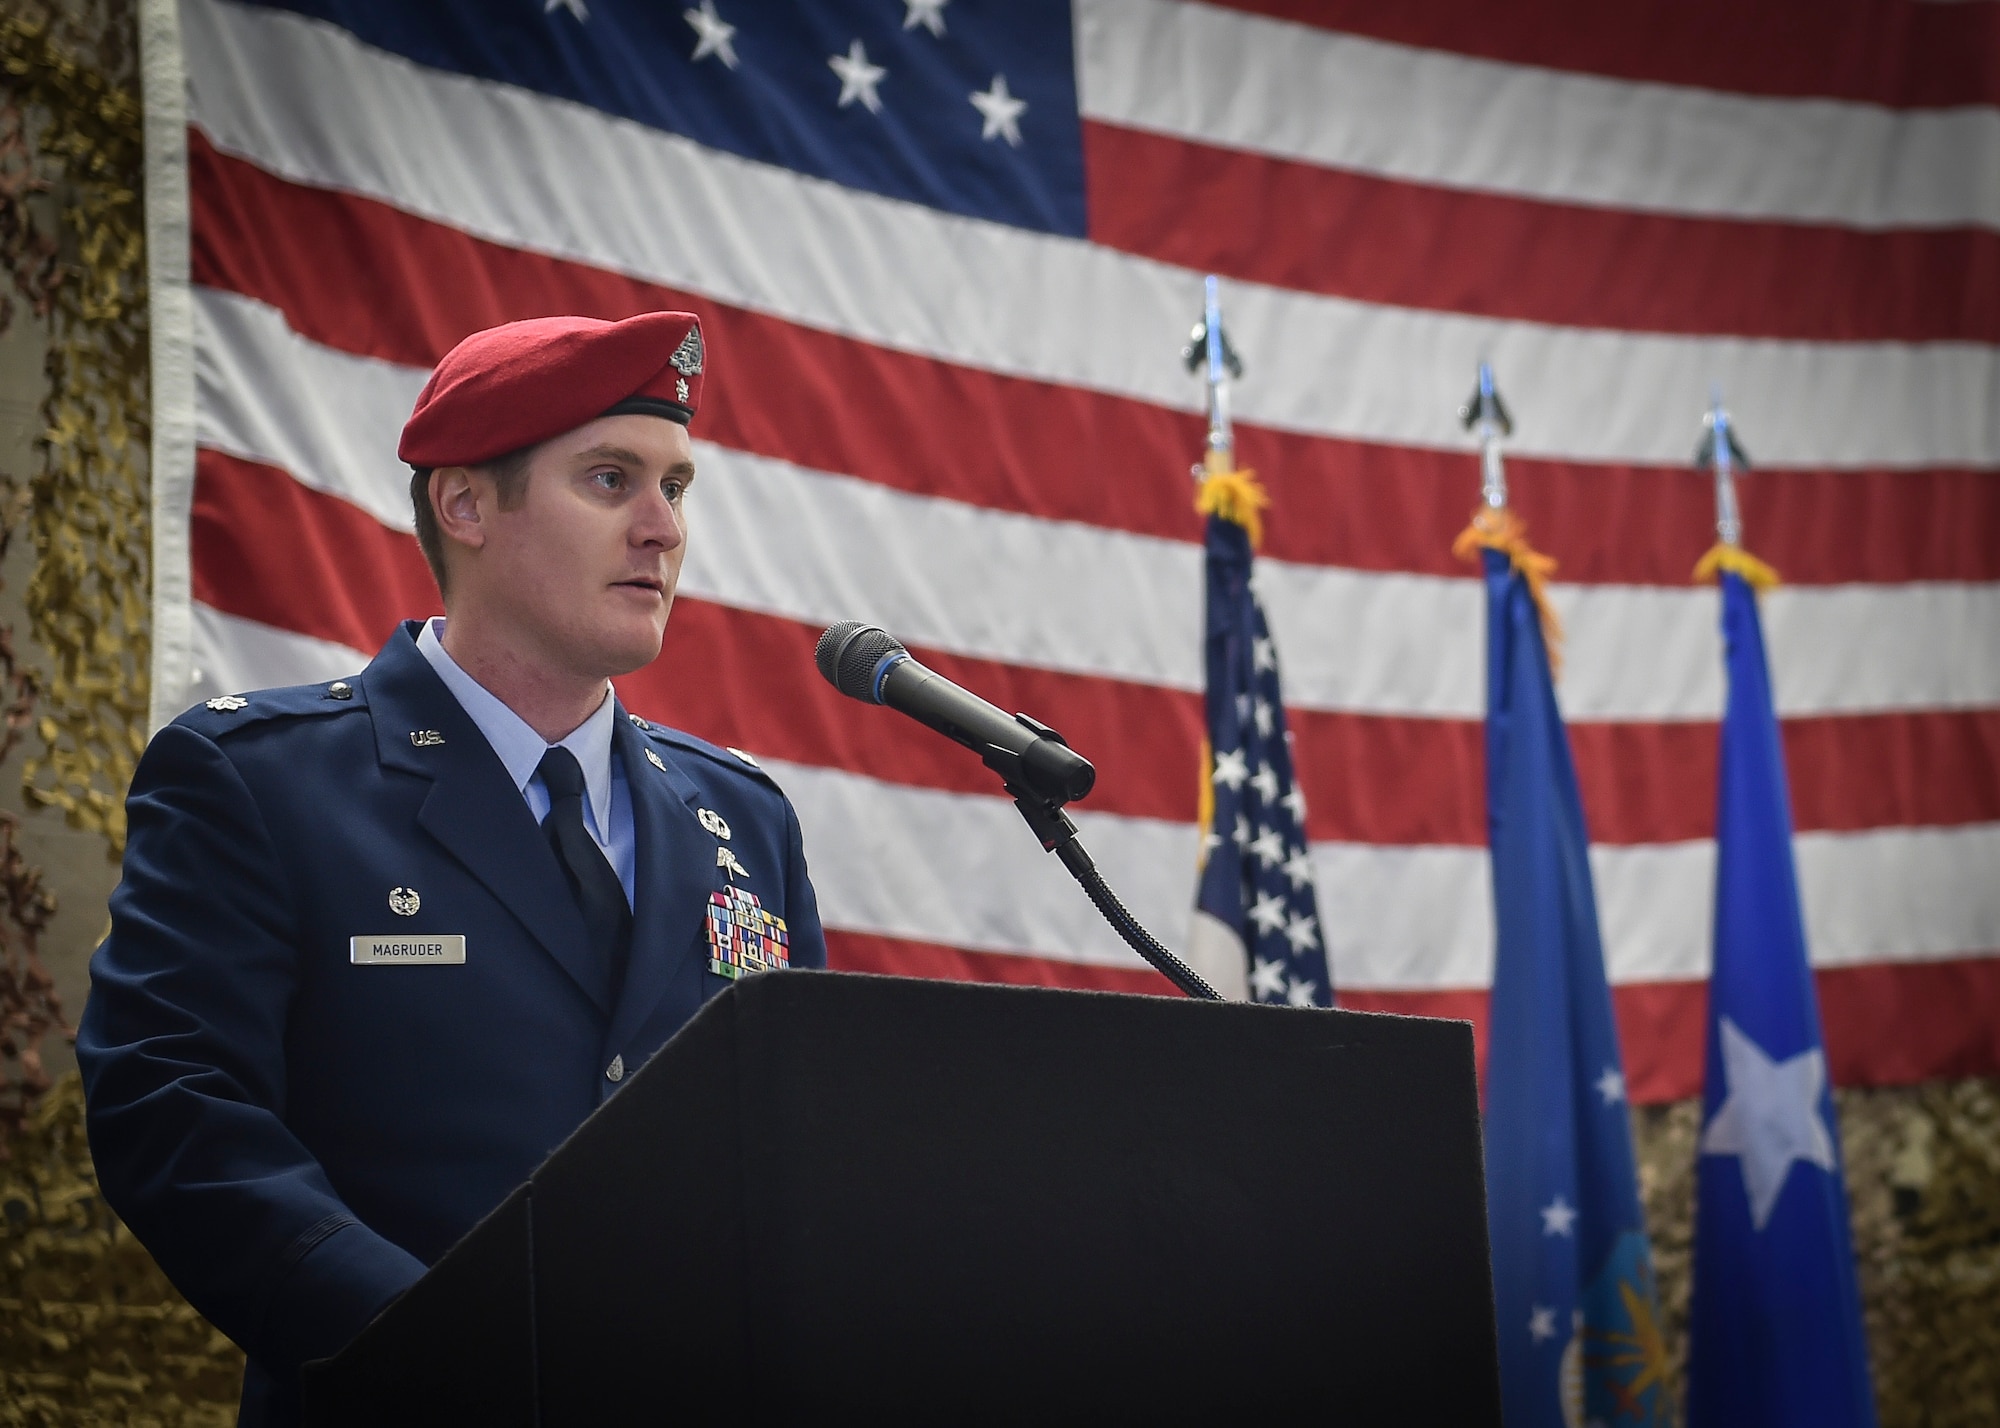 The commander of the 22nd Special Tactics Squadron, Lt. Col. Daniel Macgruder, speaks during a Silver Star Medal presentation ceremony to Staff Sgt. Keaton Thiem, a combat contoller, at Joint Base Lewis-McChord, Wash., Nov. 16, 2016. Thiem used air power to ensure the safety of his 100-plus man SOF element during a 14-hour firefight with no regard for his own personal safety, while deployed with U.S. Army Special Operations Forces in Afghanistan.(U.S. Air Force photo by Senior Airman Ryan Conroy)